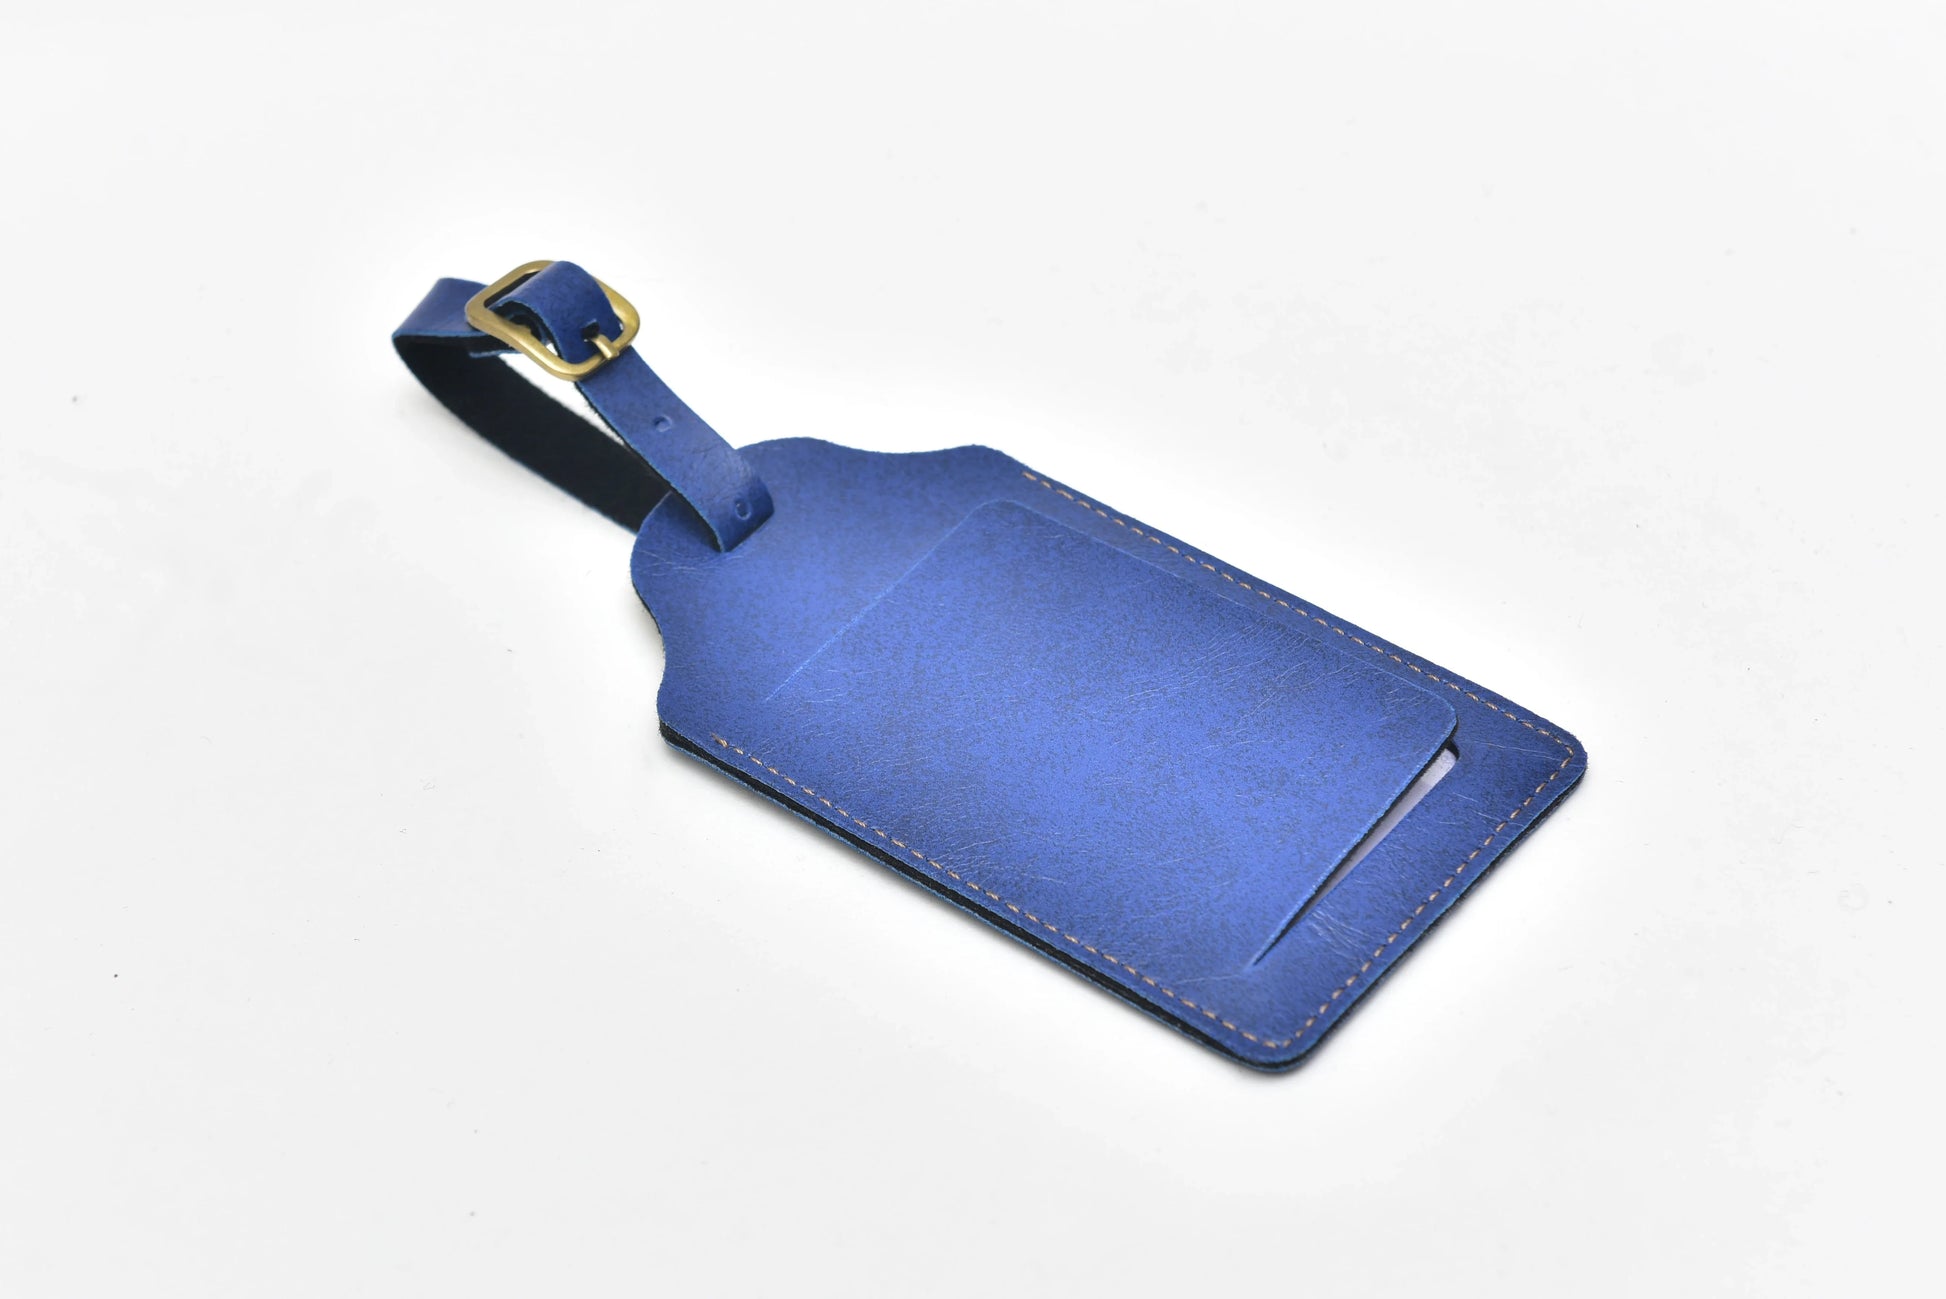 Travel smart with our customized luggage tags. These tags are made from durable materials, and can be personalized with your choice of design, logo, or photo, making them the perfect choice for anyone looking for a functional and stylish accessory. Back view of royal blue luggage tag